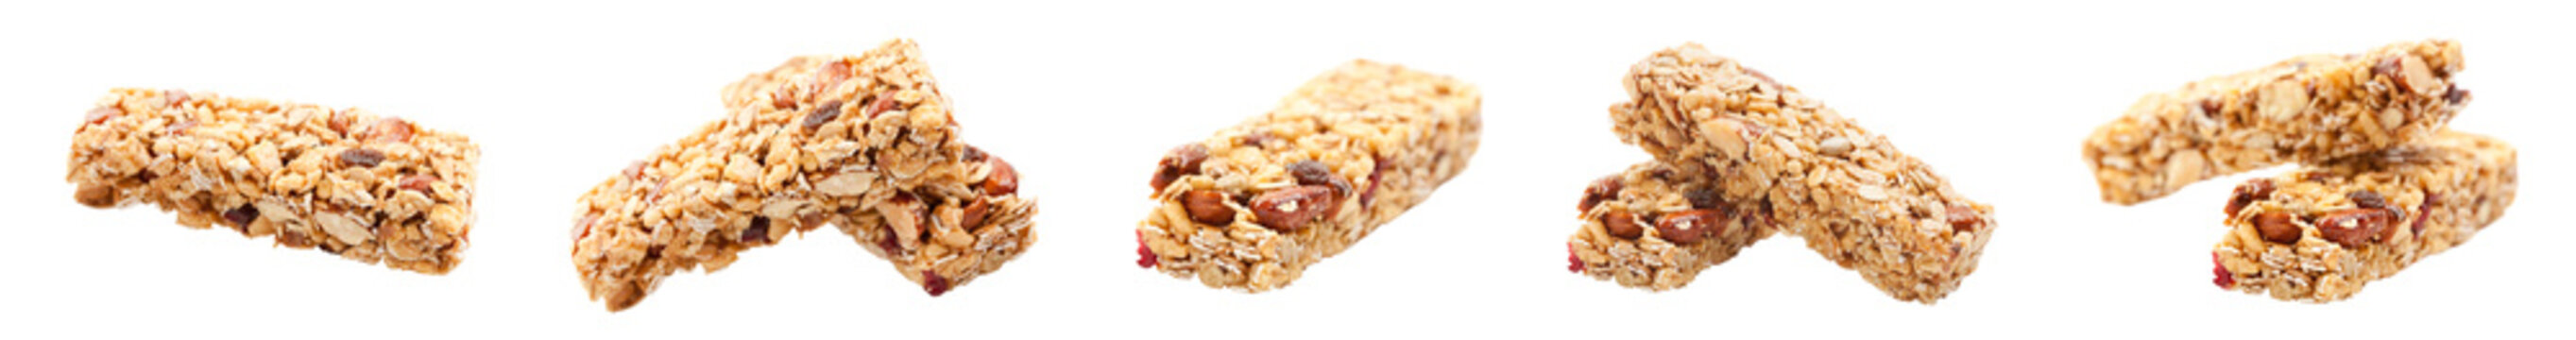 Set of a Variety of Isolated Healthy Granola Bars on a Transparent Background. Transparent PNG.